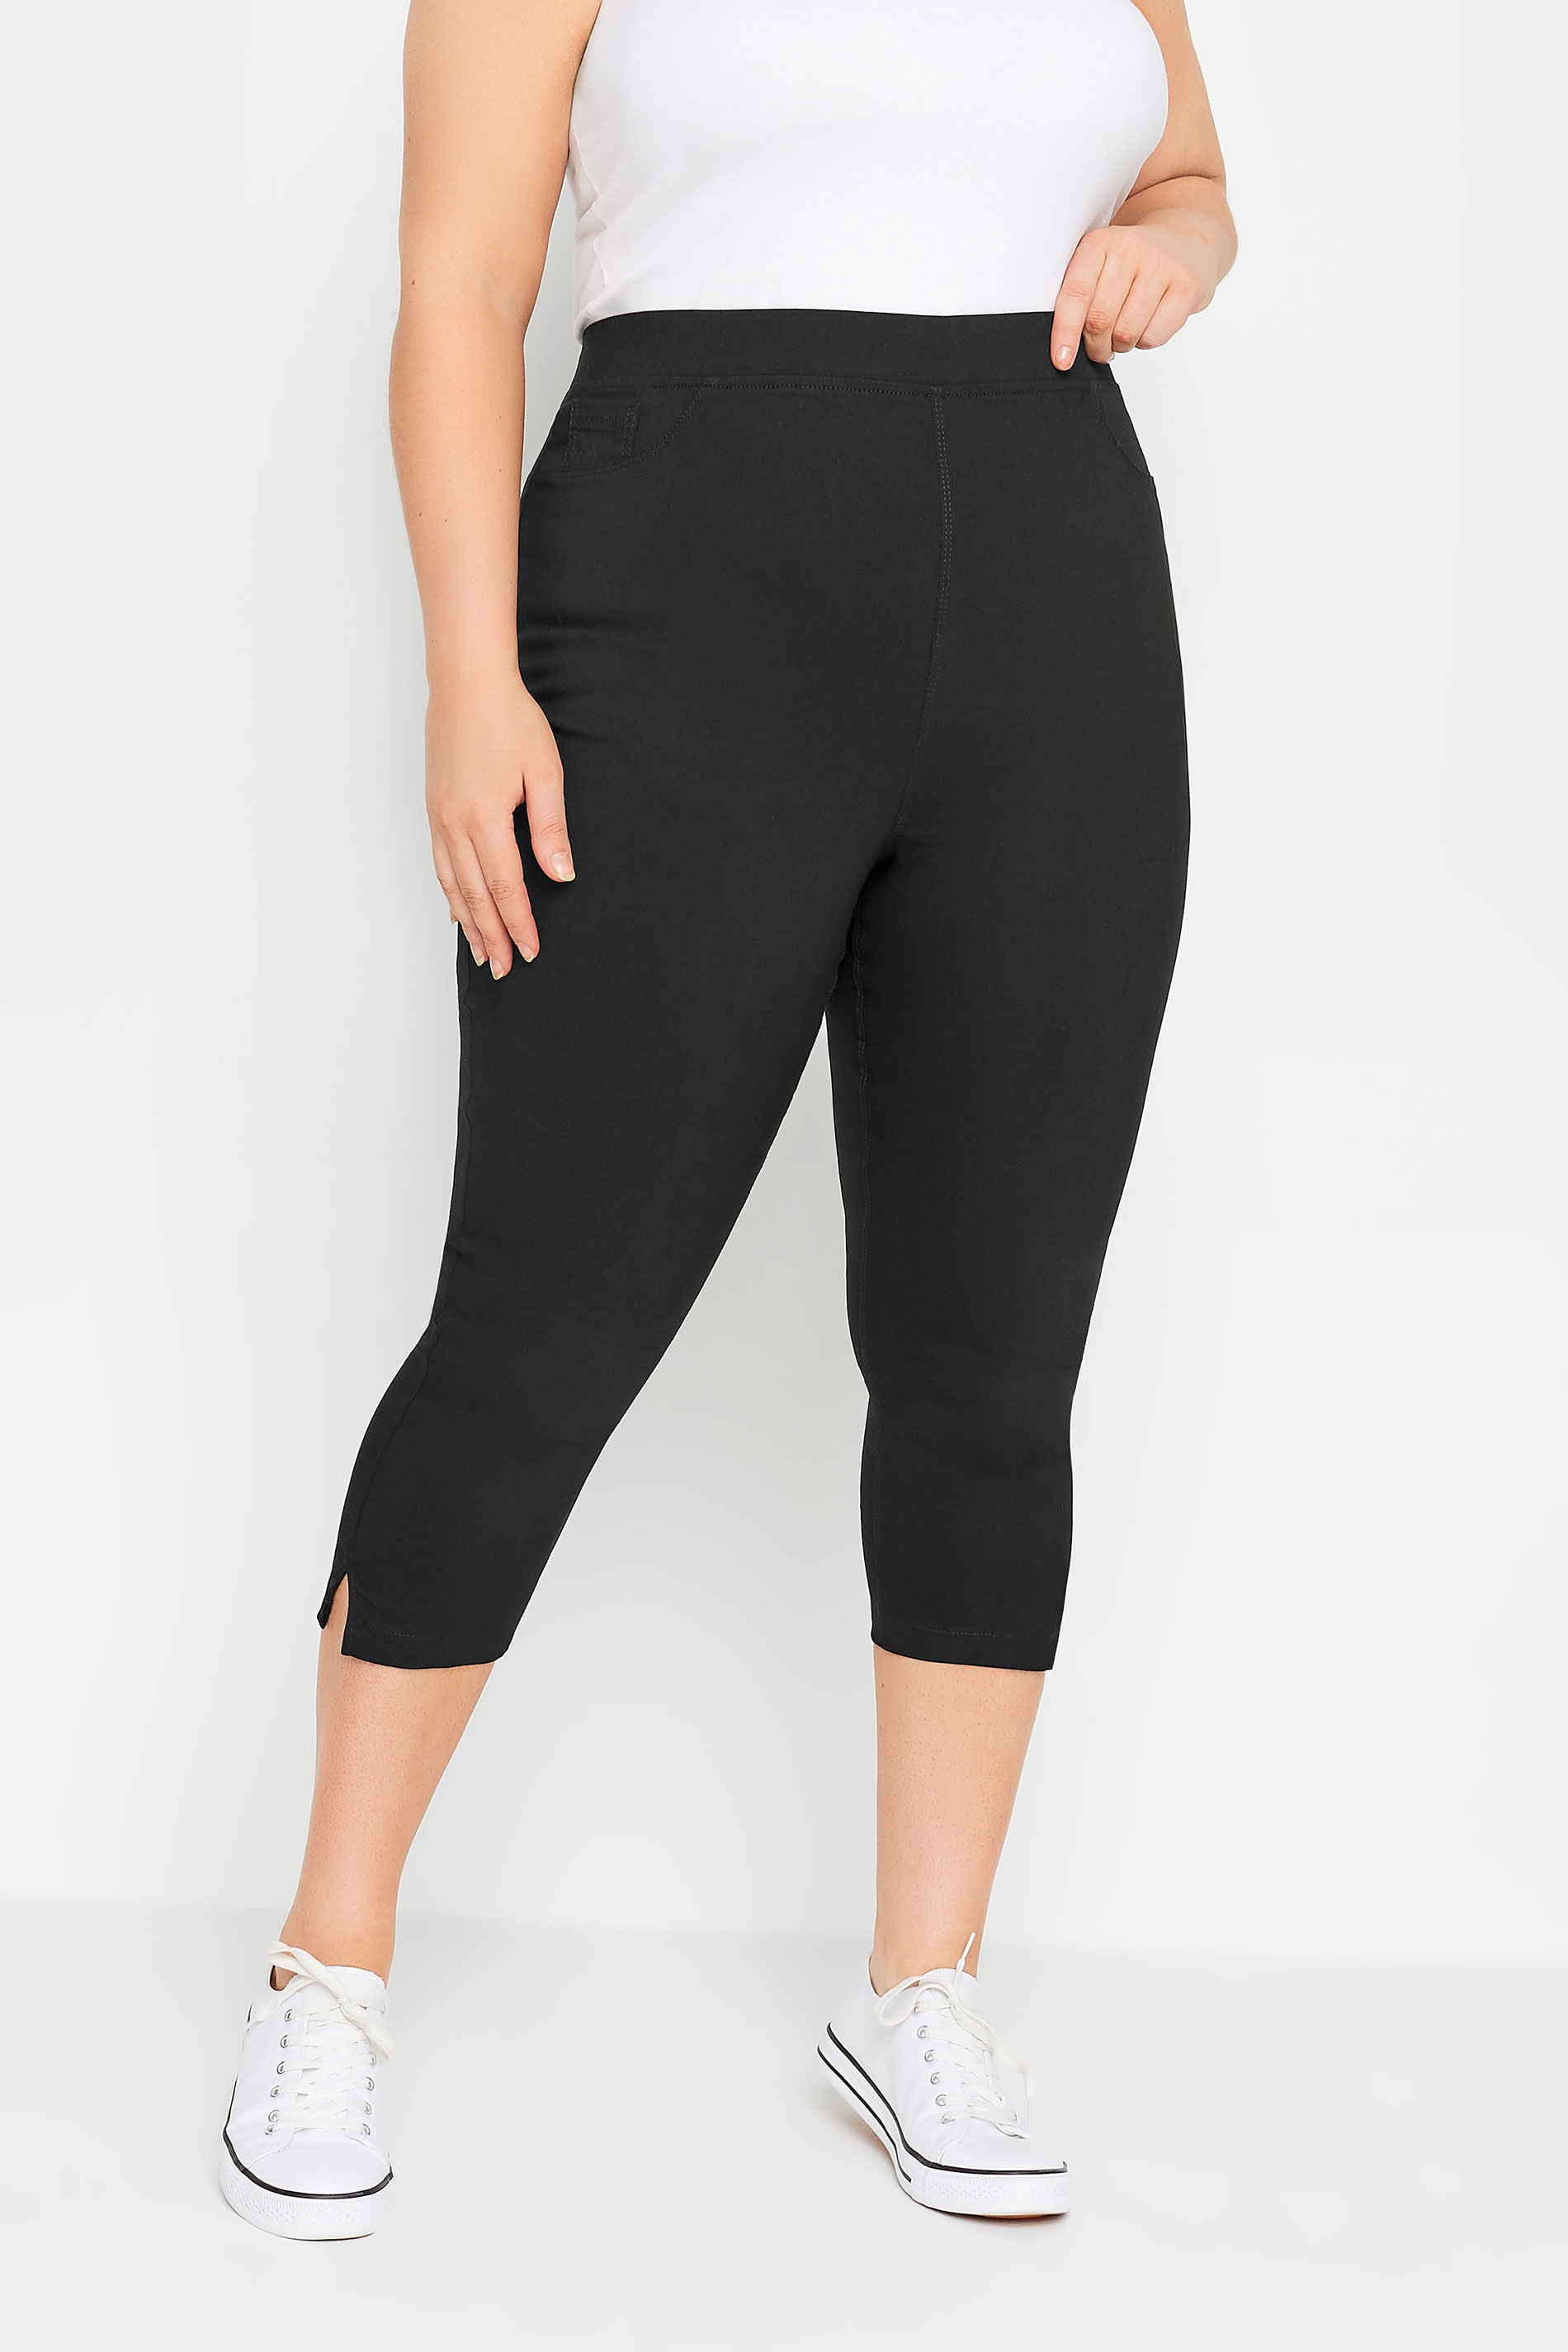 Black Bengaline Cropped Pull On Trousers, plus size 16 to 36 1